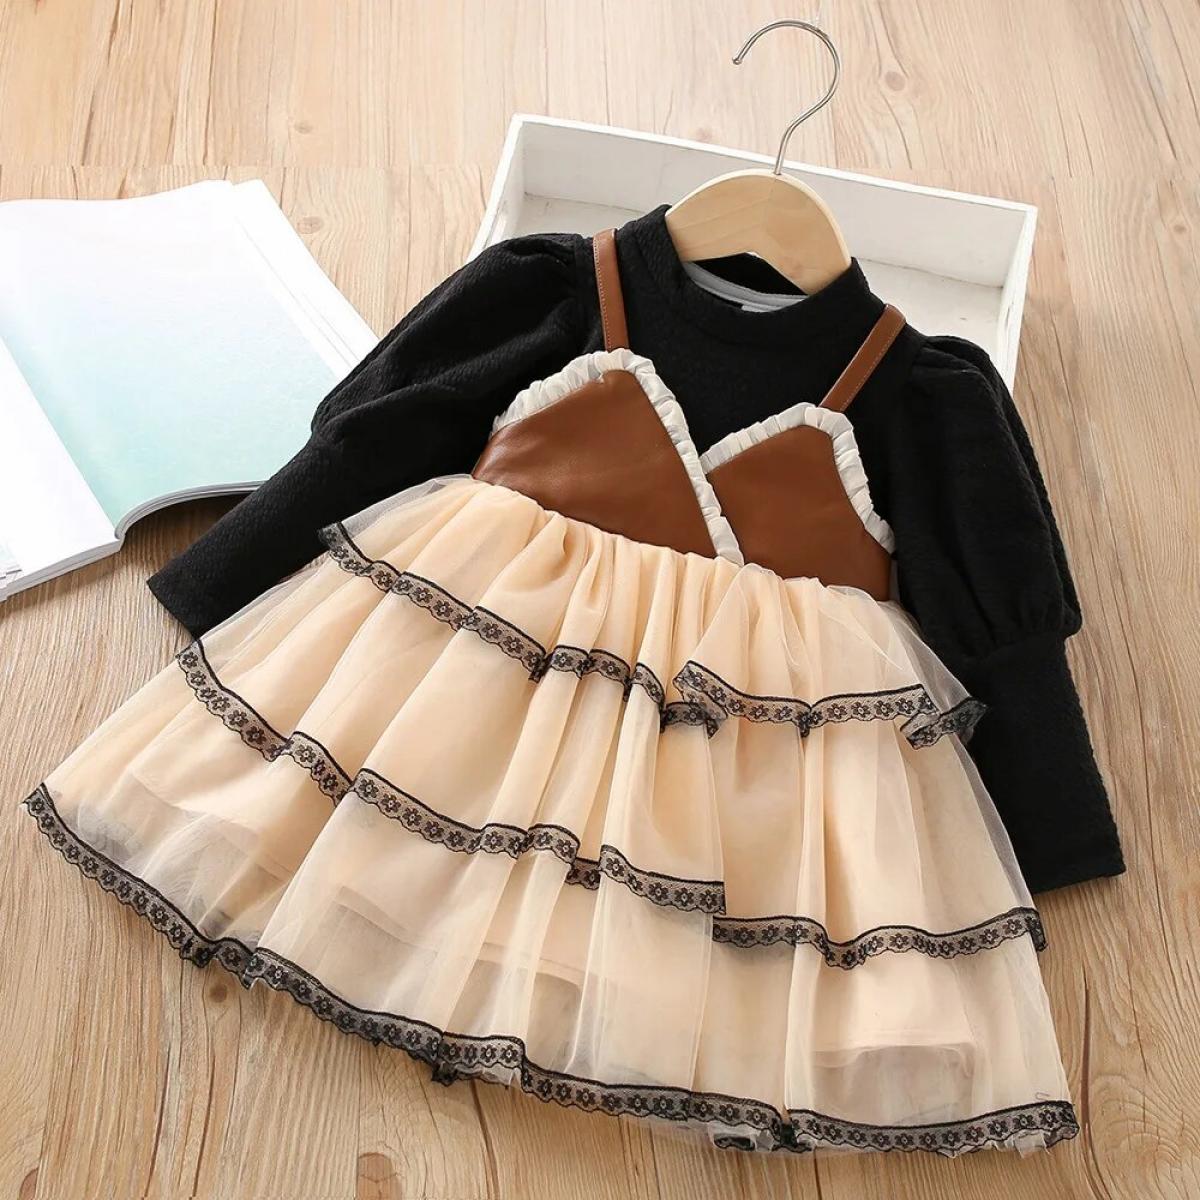 Girls' Dress Cute Bow Opening Ceremony Dress Fashionable Bubble Sleeve Mesh Princess Dress 0 6 Year Old Children's Cloth